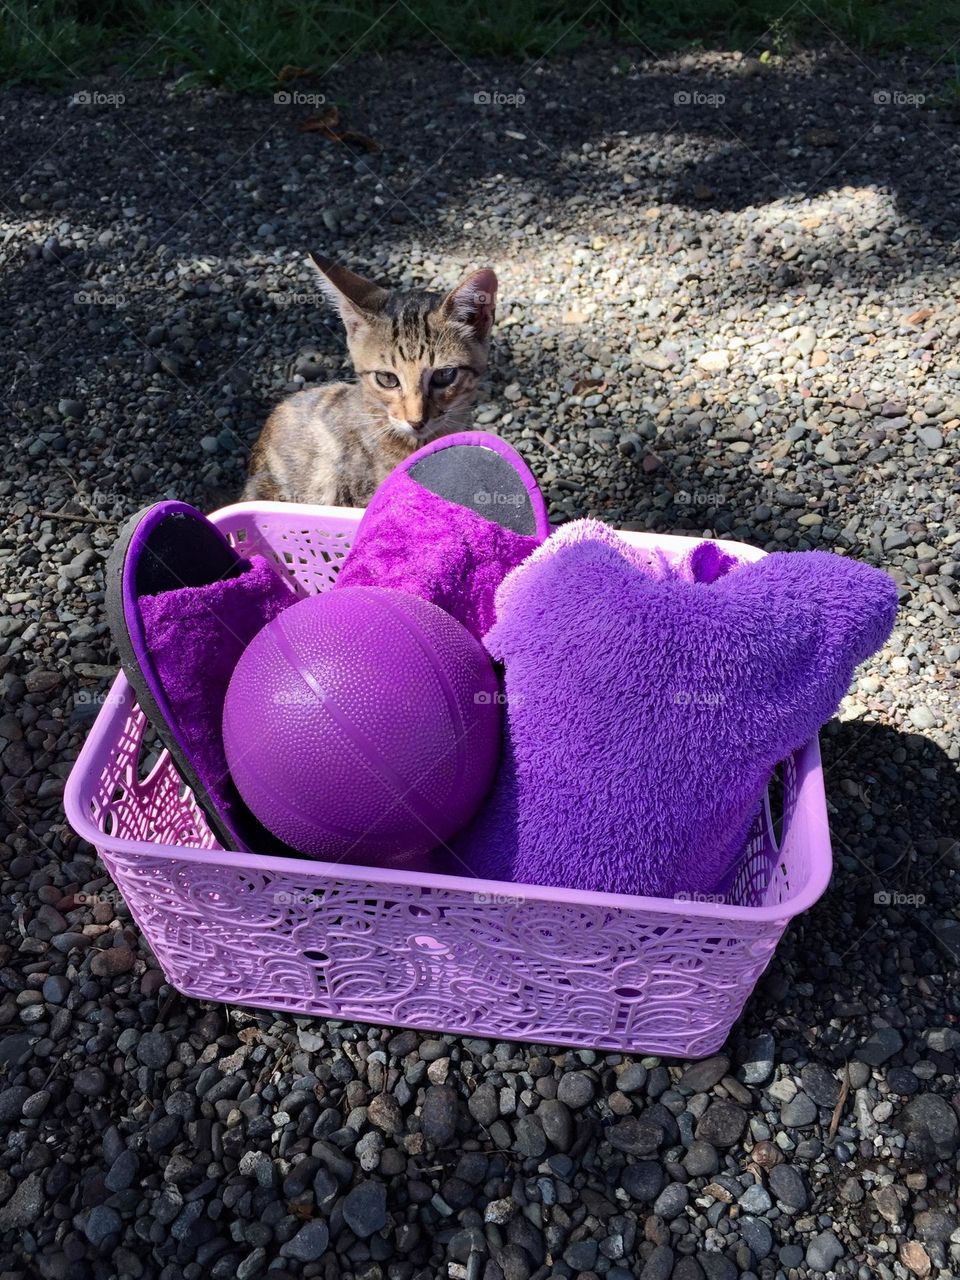 Slippers,ball and towel in one basket. And a cutie cat.